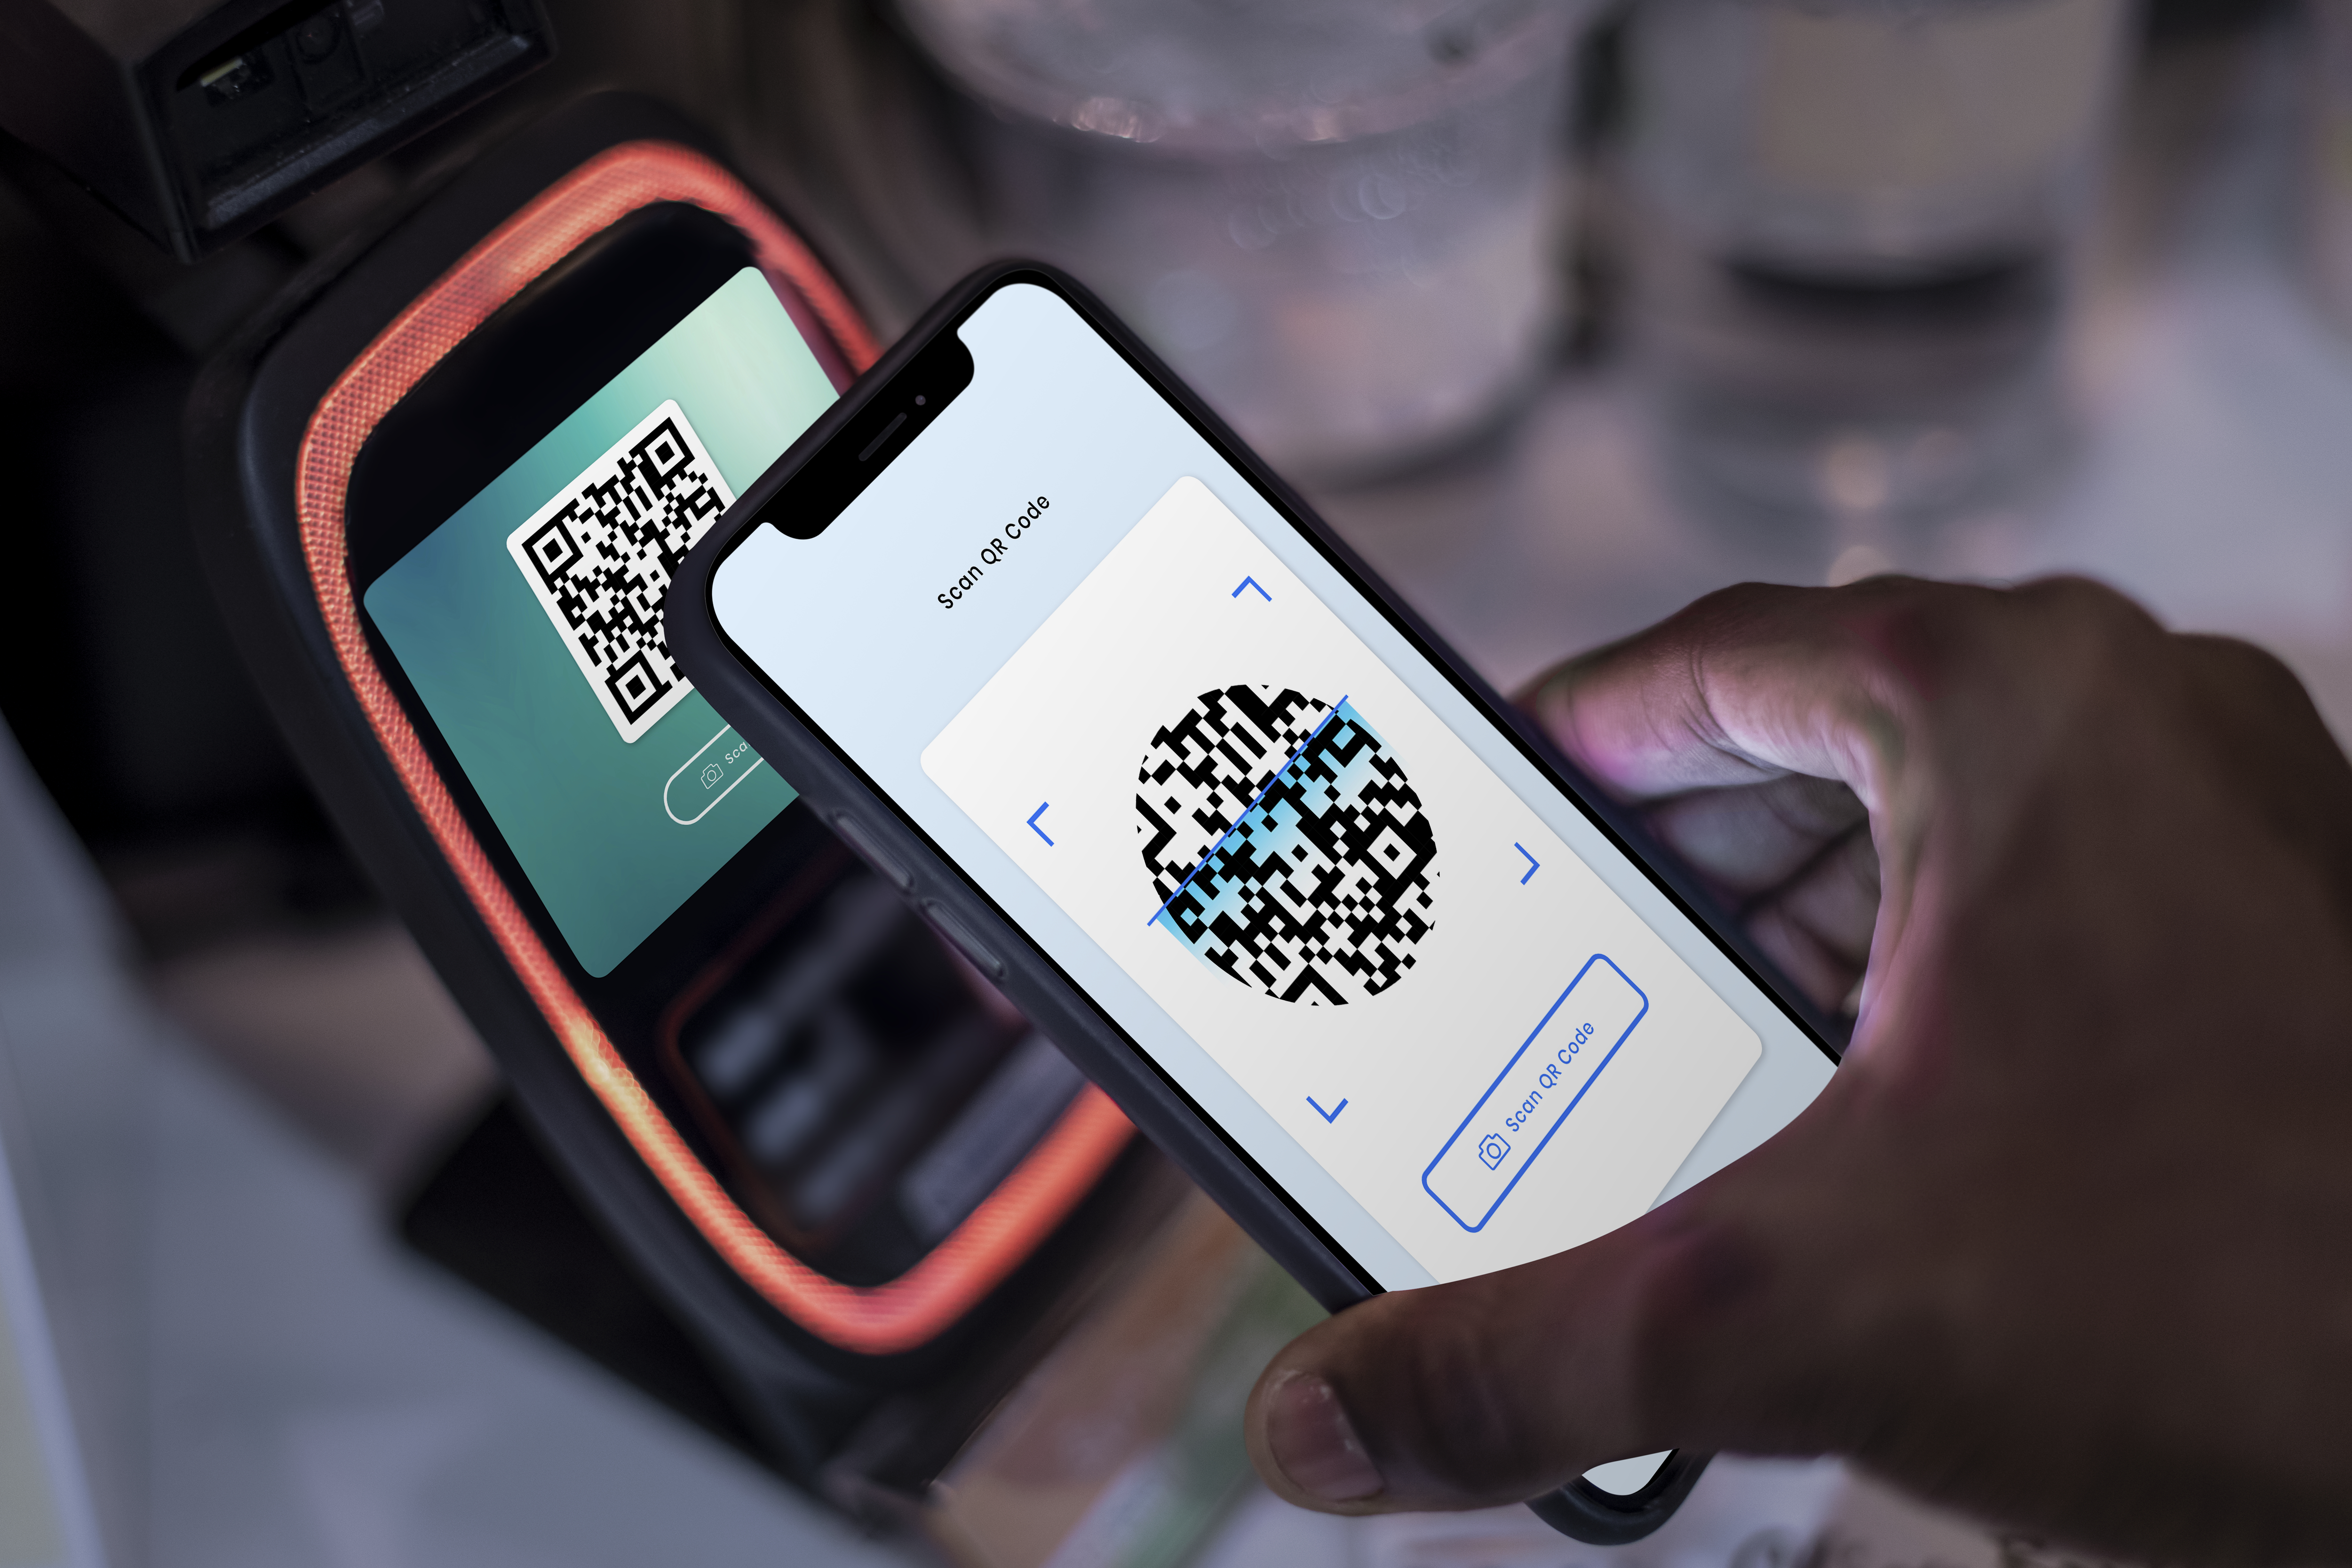 DBS and OCBC to introduce QR based payments at offline stores